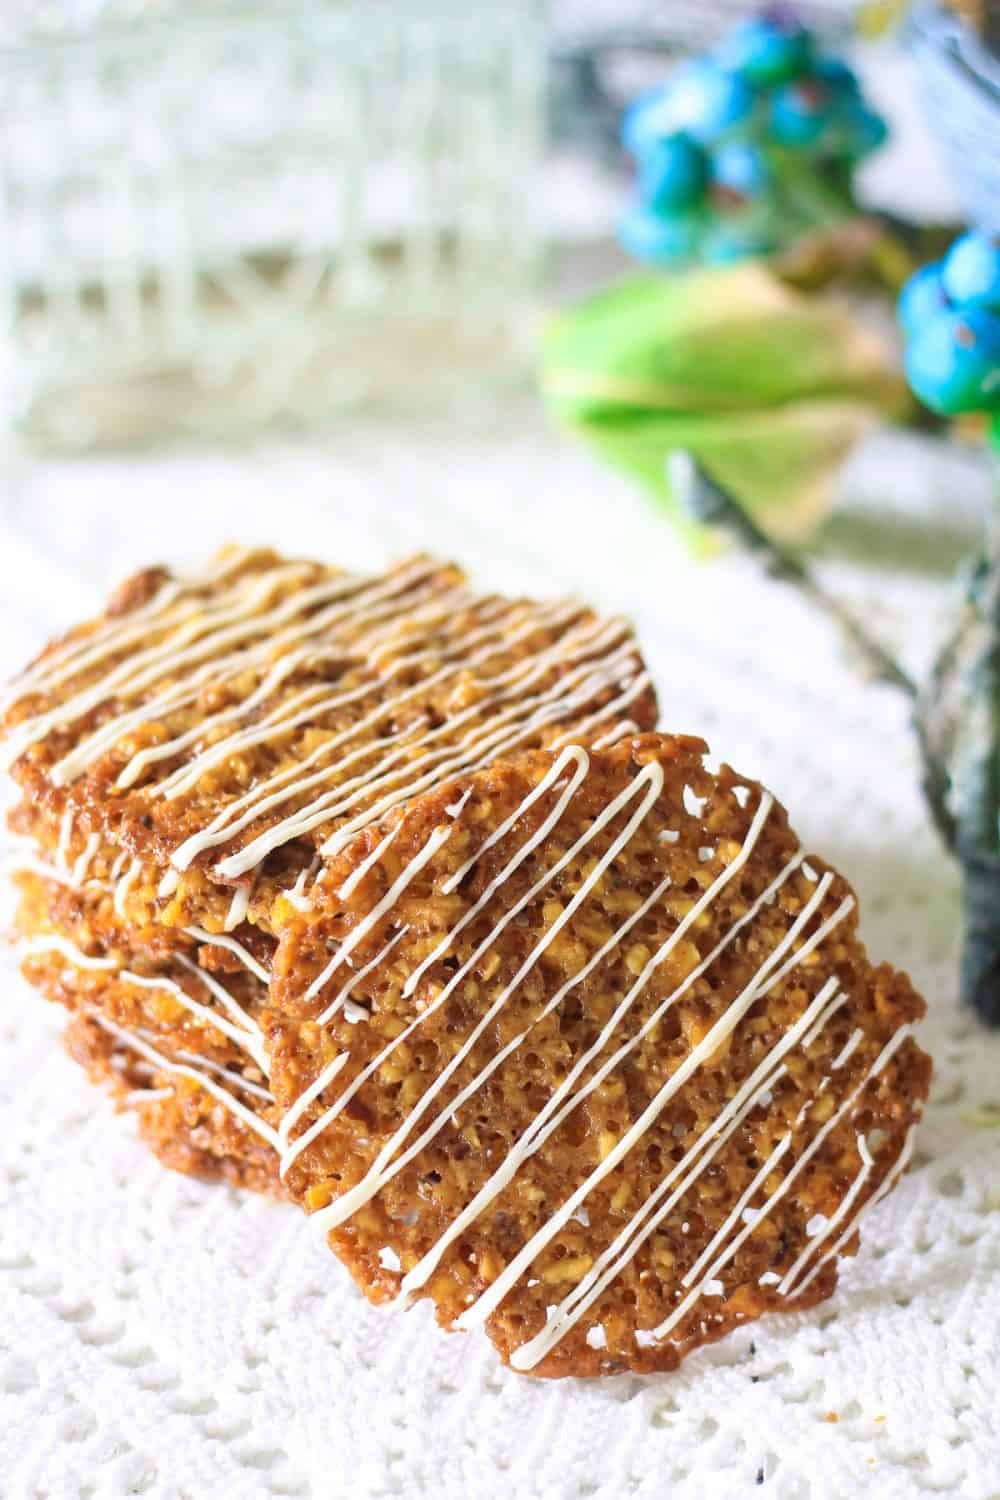 Photograph of a stack of florentine cookies with white chocolate drizzle laying on a lace tablecloth